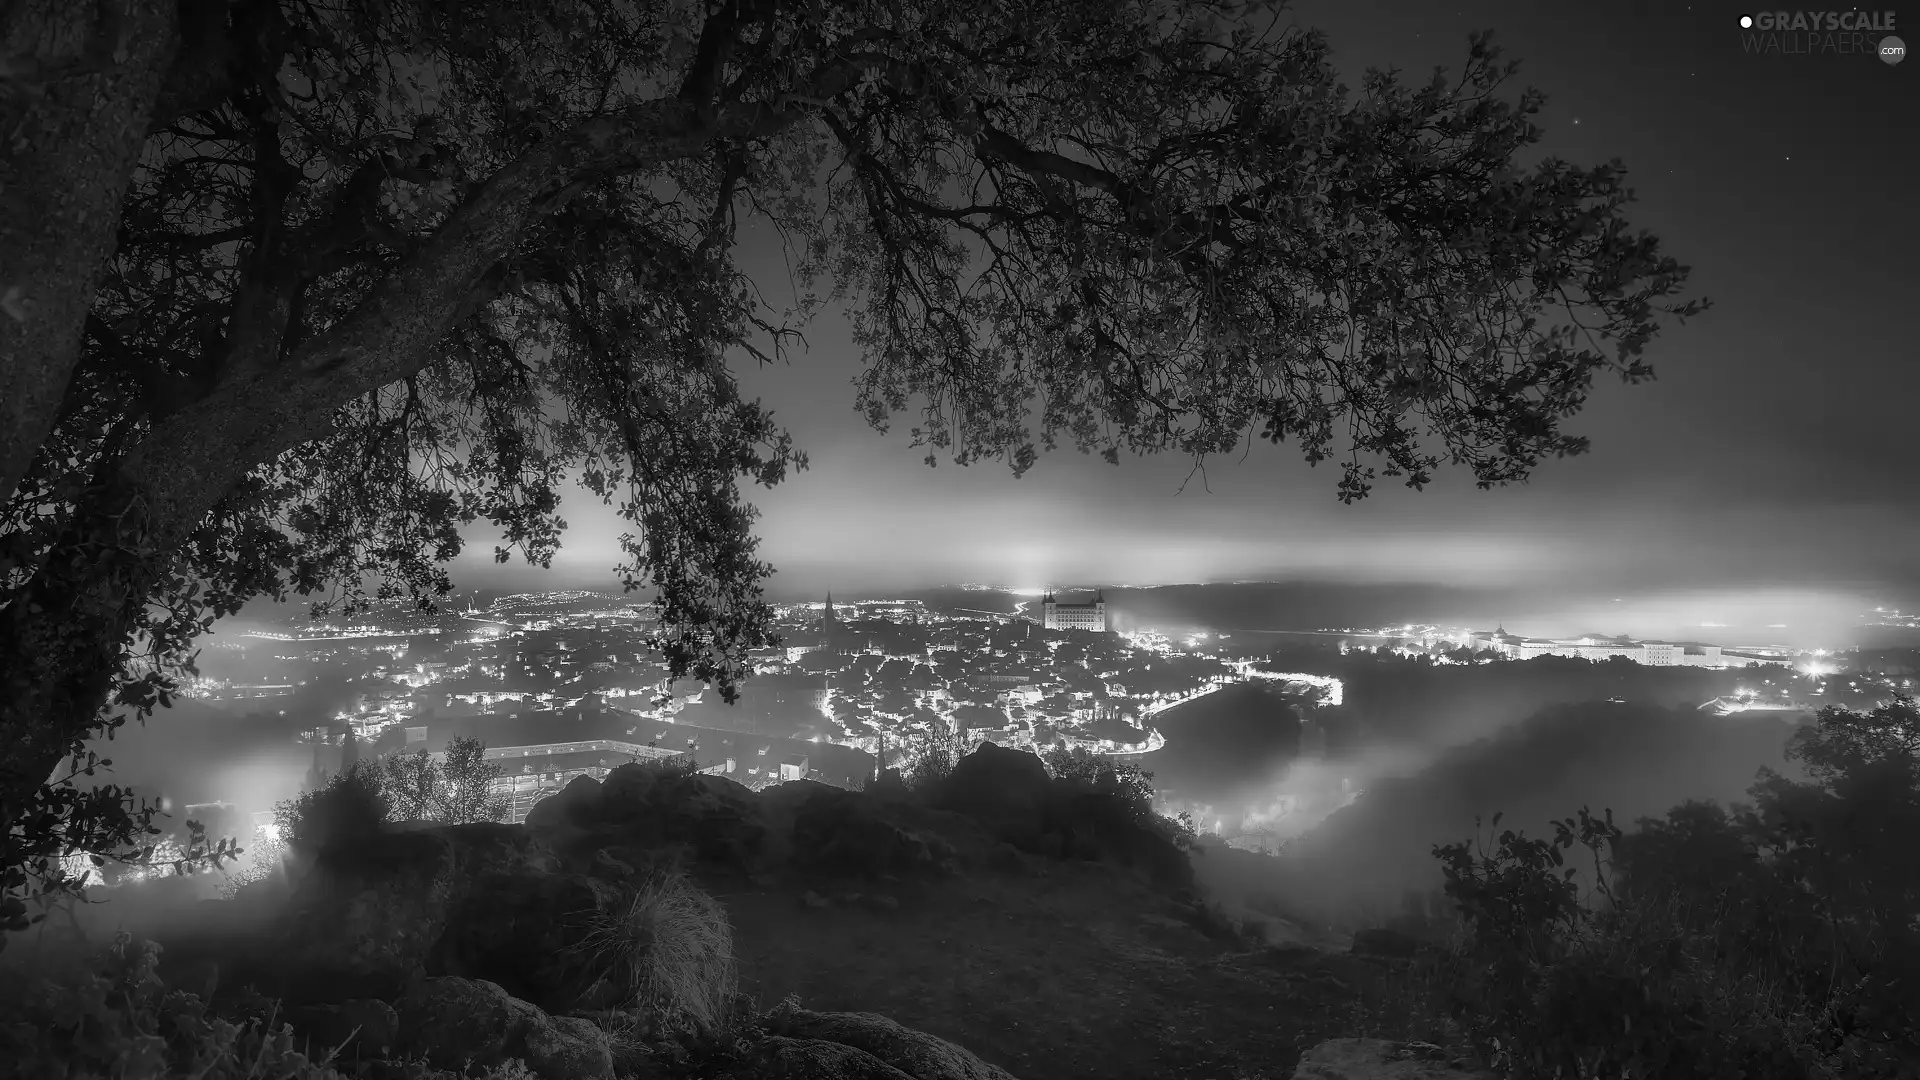 illuminated, The Hills, Town, Night, viewes, star, Fog, trees, Houses